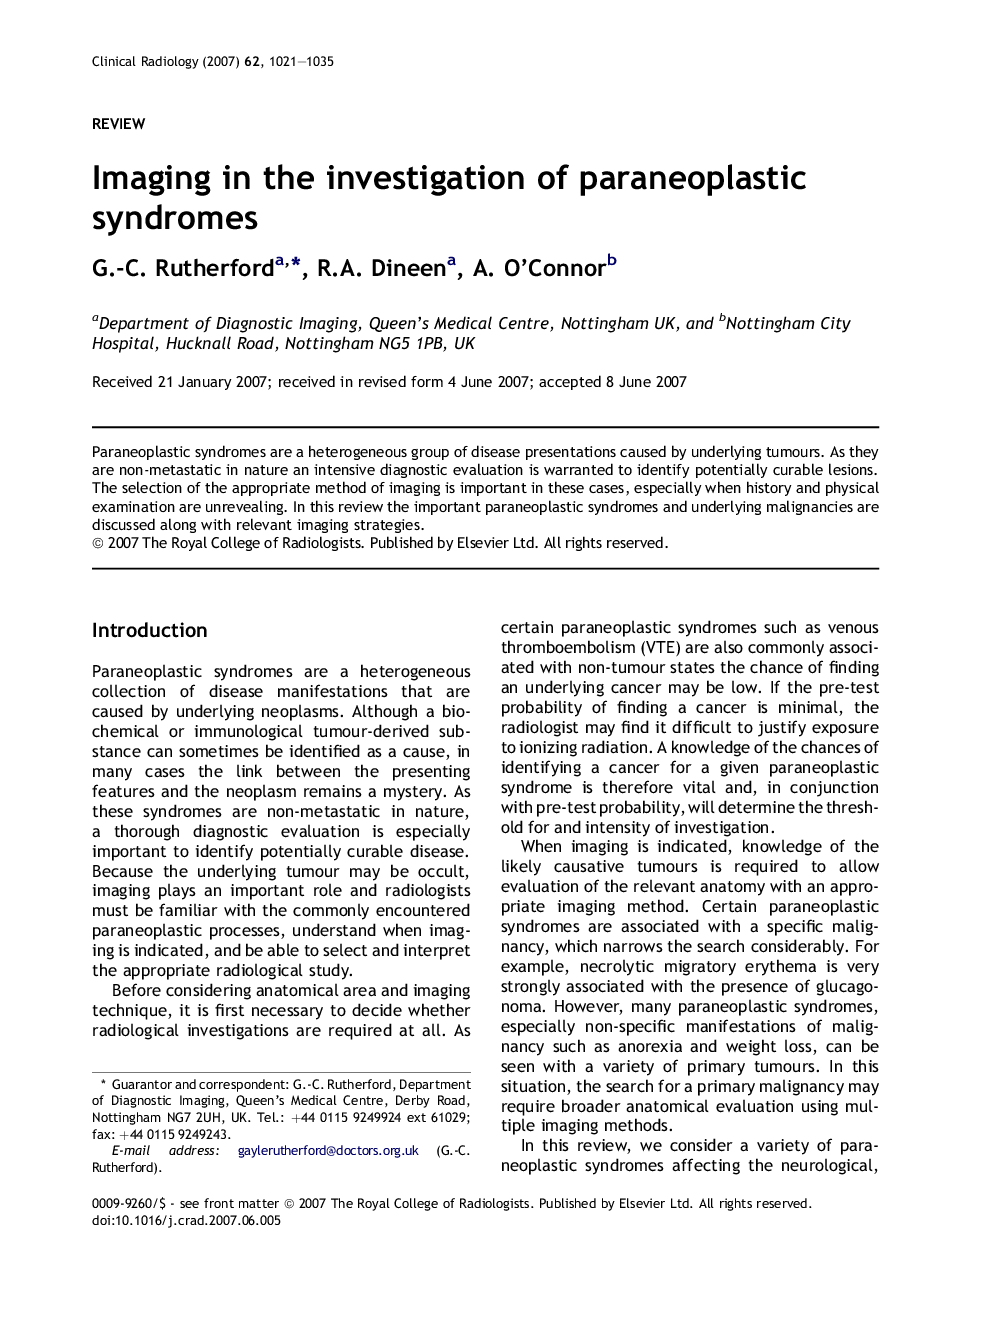 Imaging in the investigation of paraneoplastic syndromes